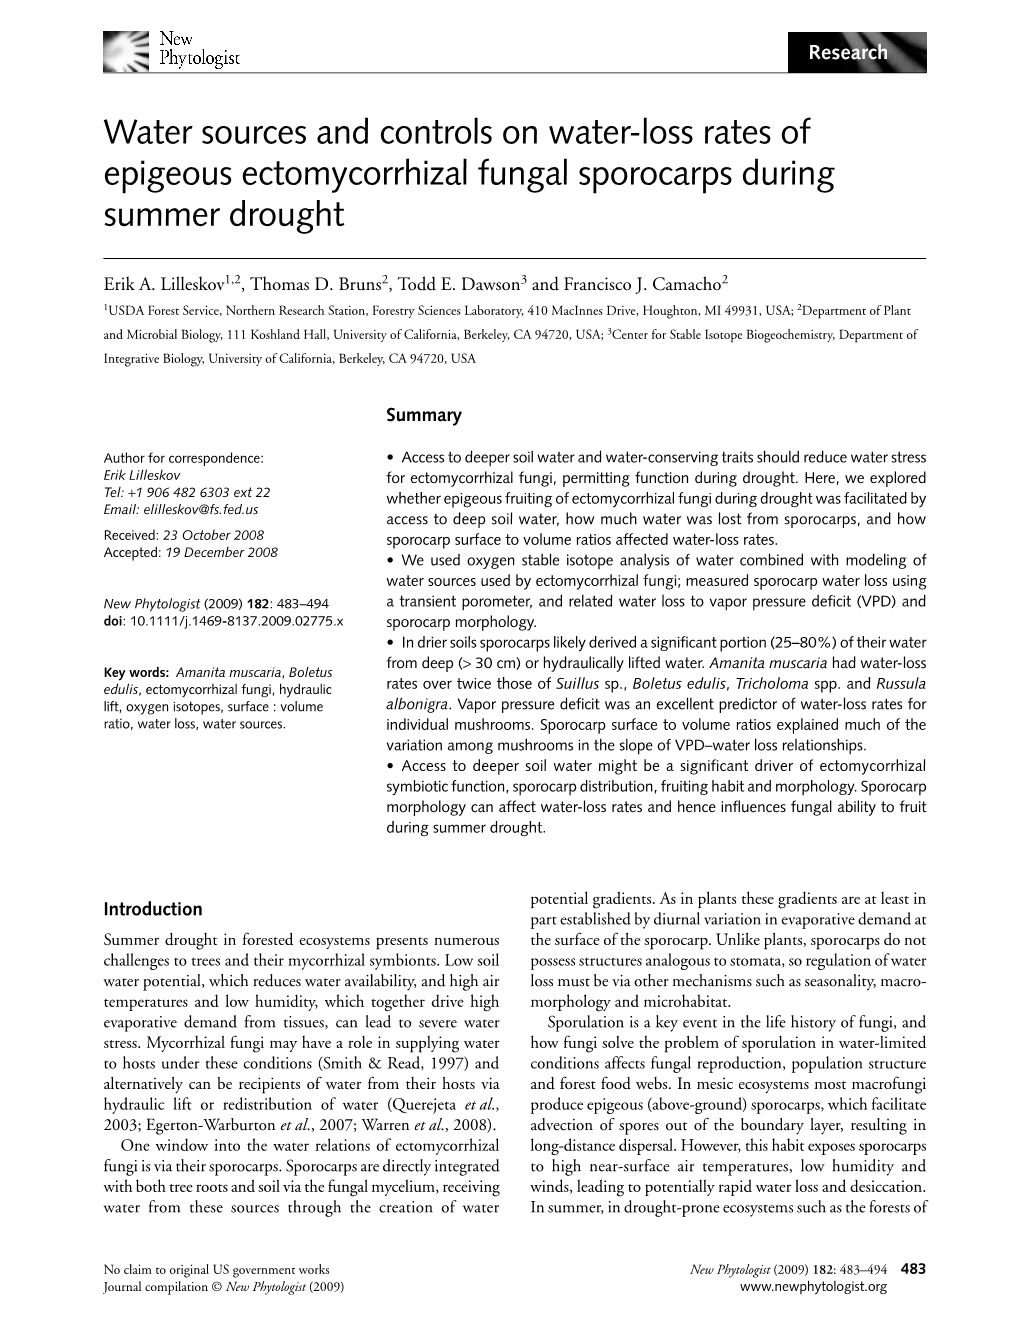 Water Sources and Controls on Water-Loss Rates of Epigeous Ectomycorrhizal Fungal Sporocarps During Summer Drought